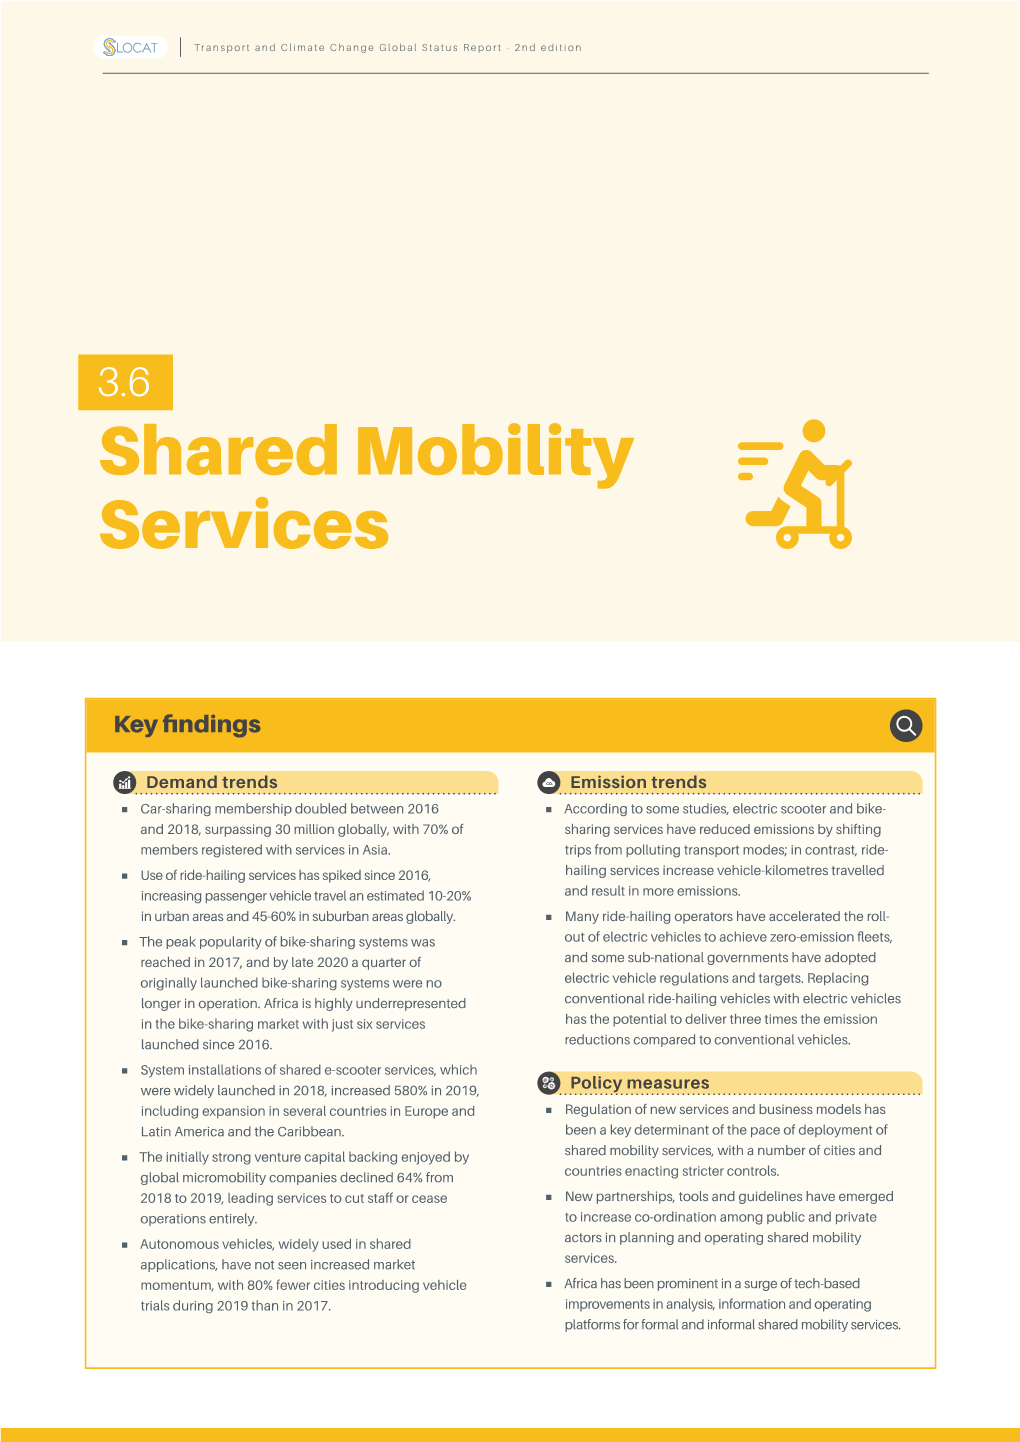 Shared Mobility Services